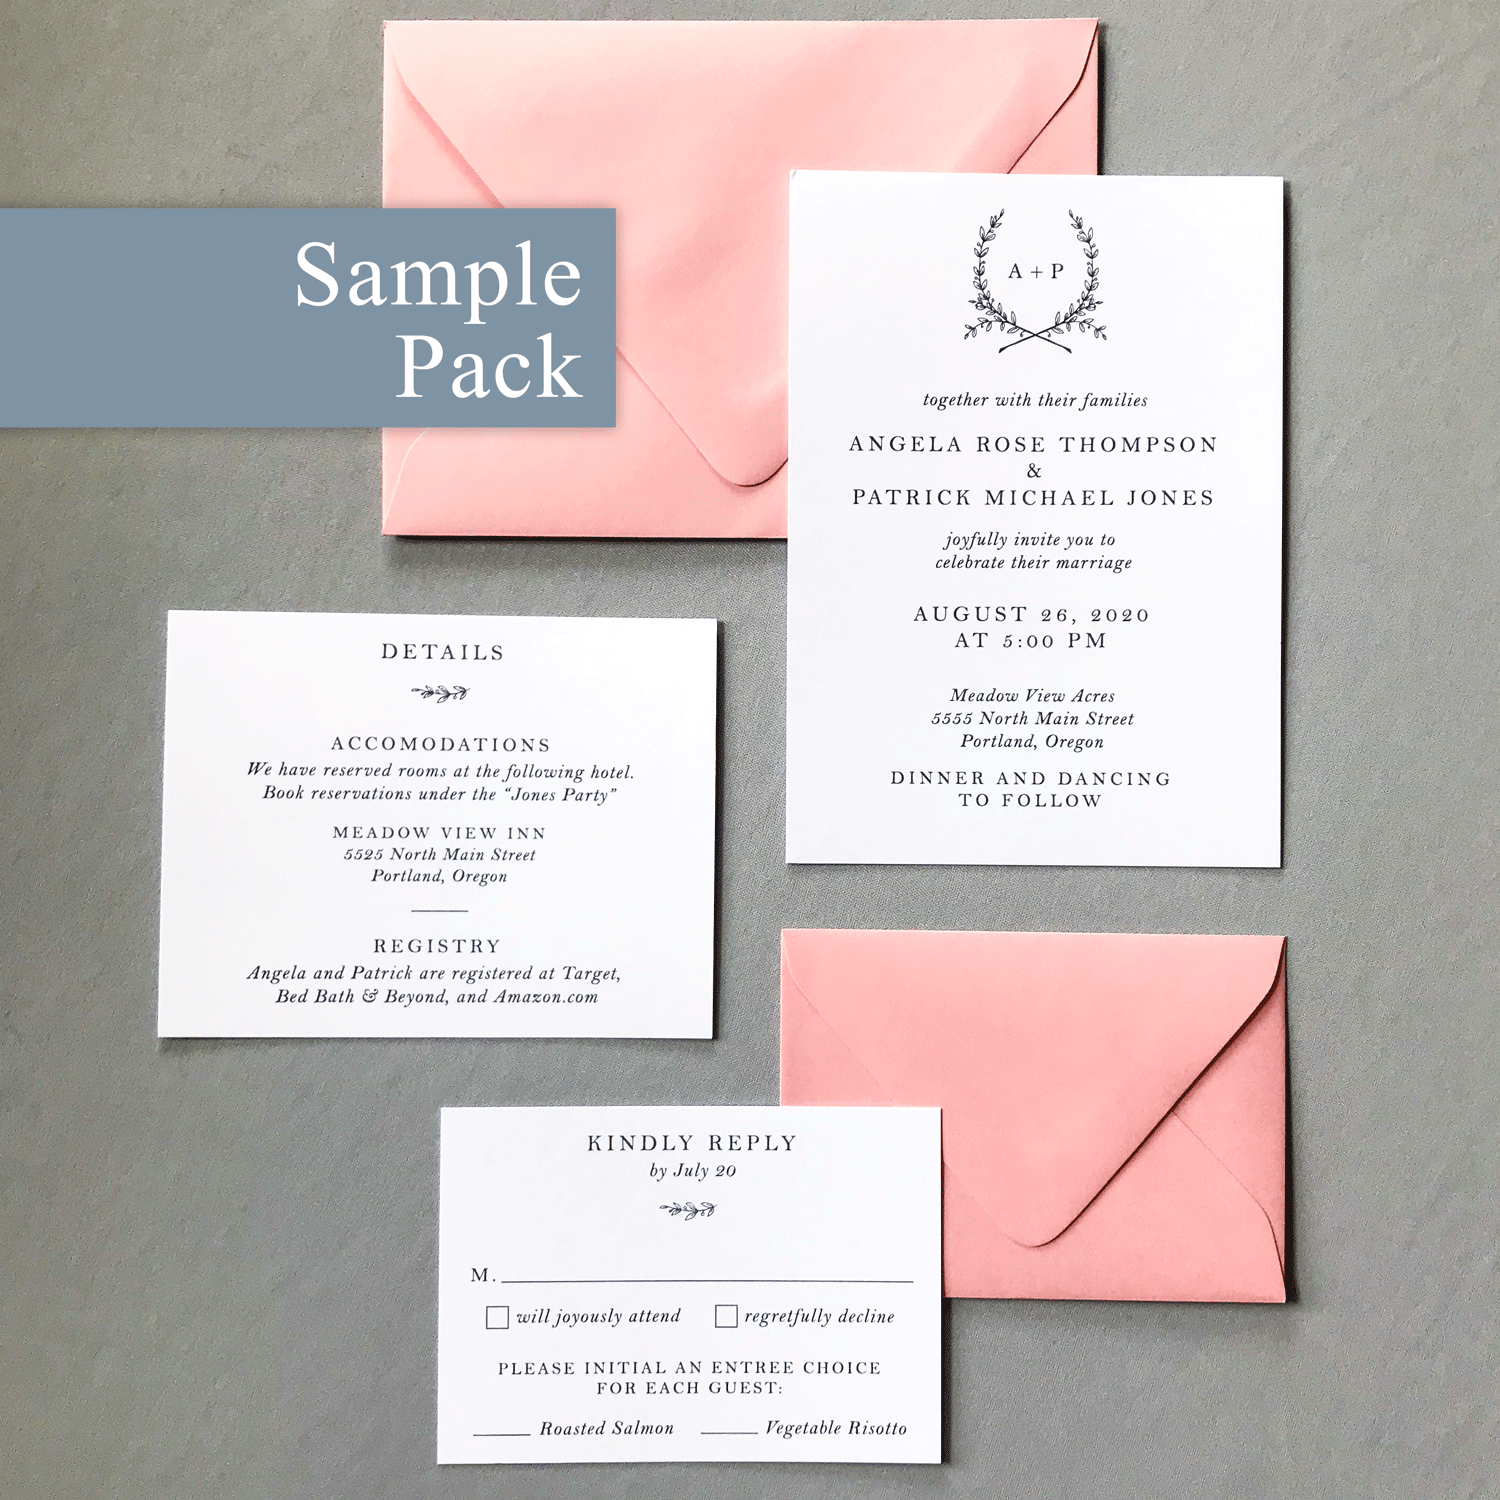 Invitation Sample Pack Close up with Details Card and RSVP in white and Candy Pink - The Ophelia Suite - Minimal Floral Monogram Wedding Invitation Collection